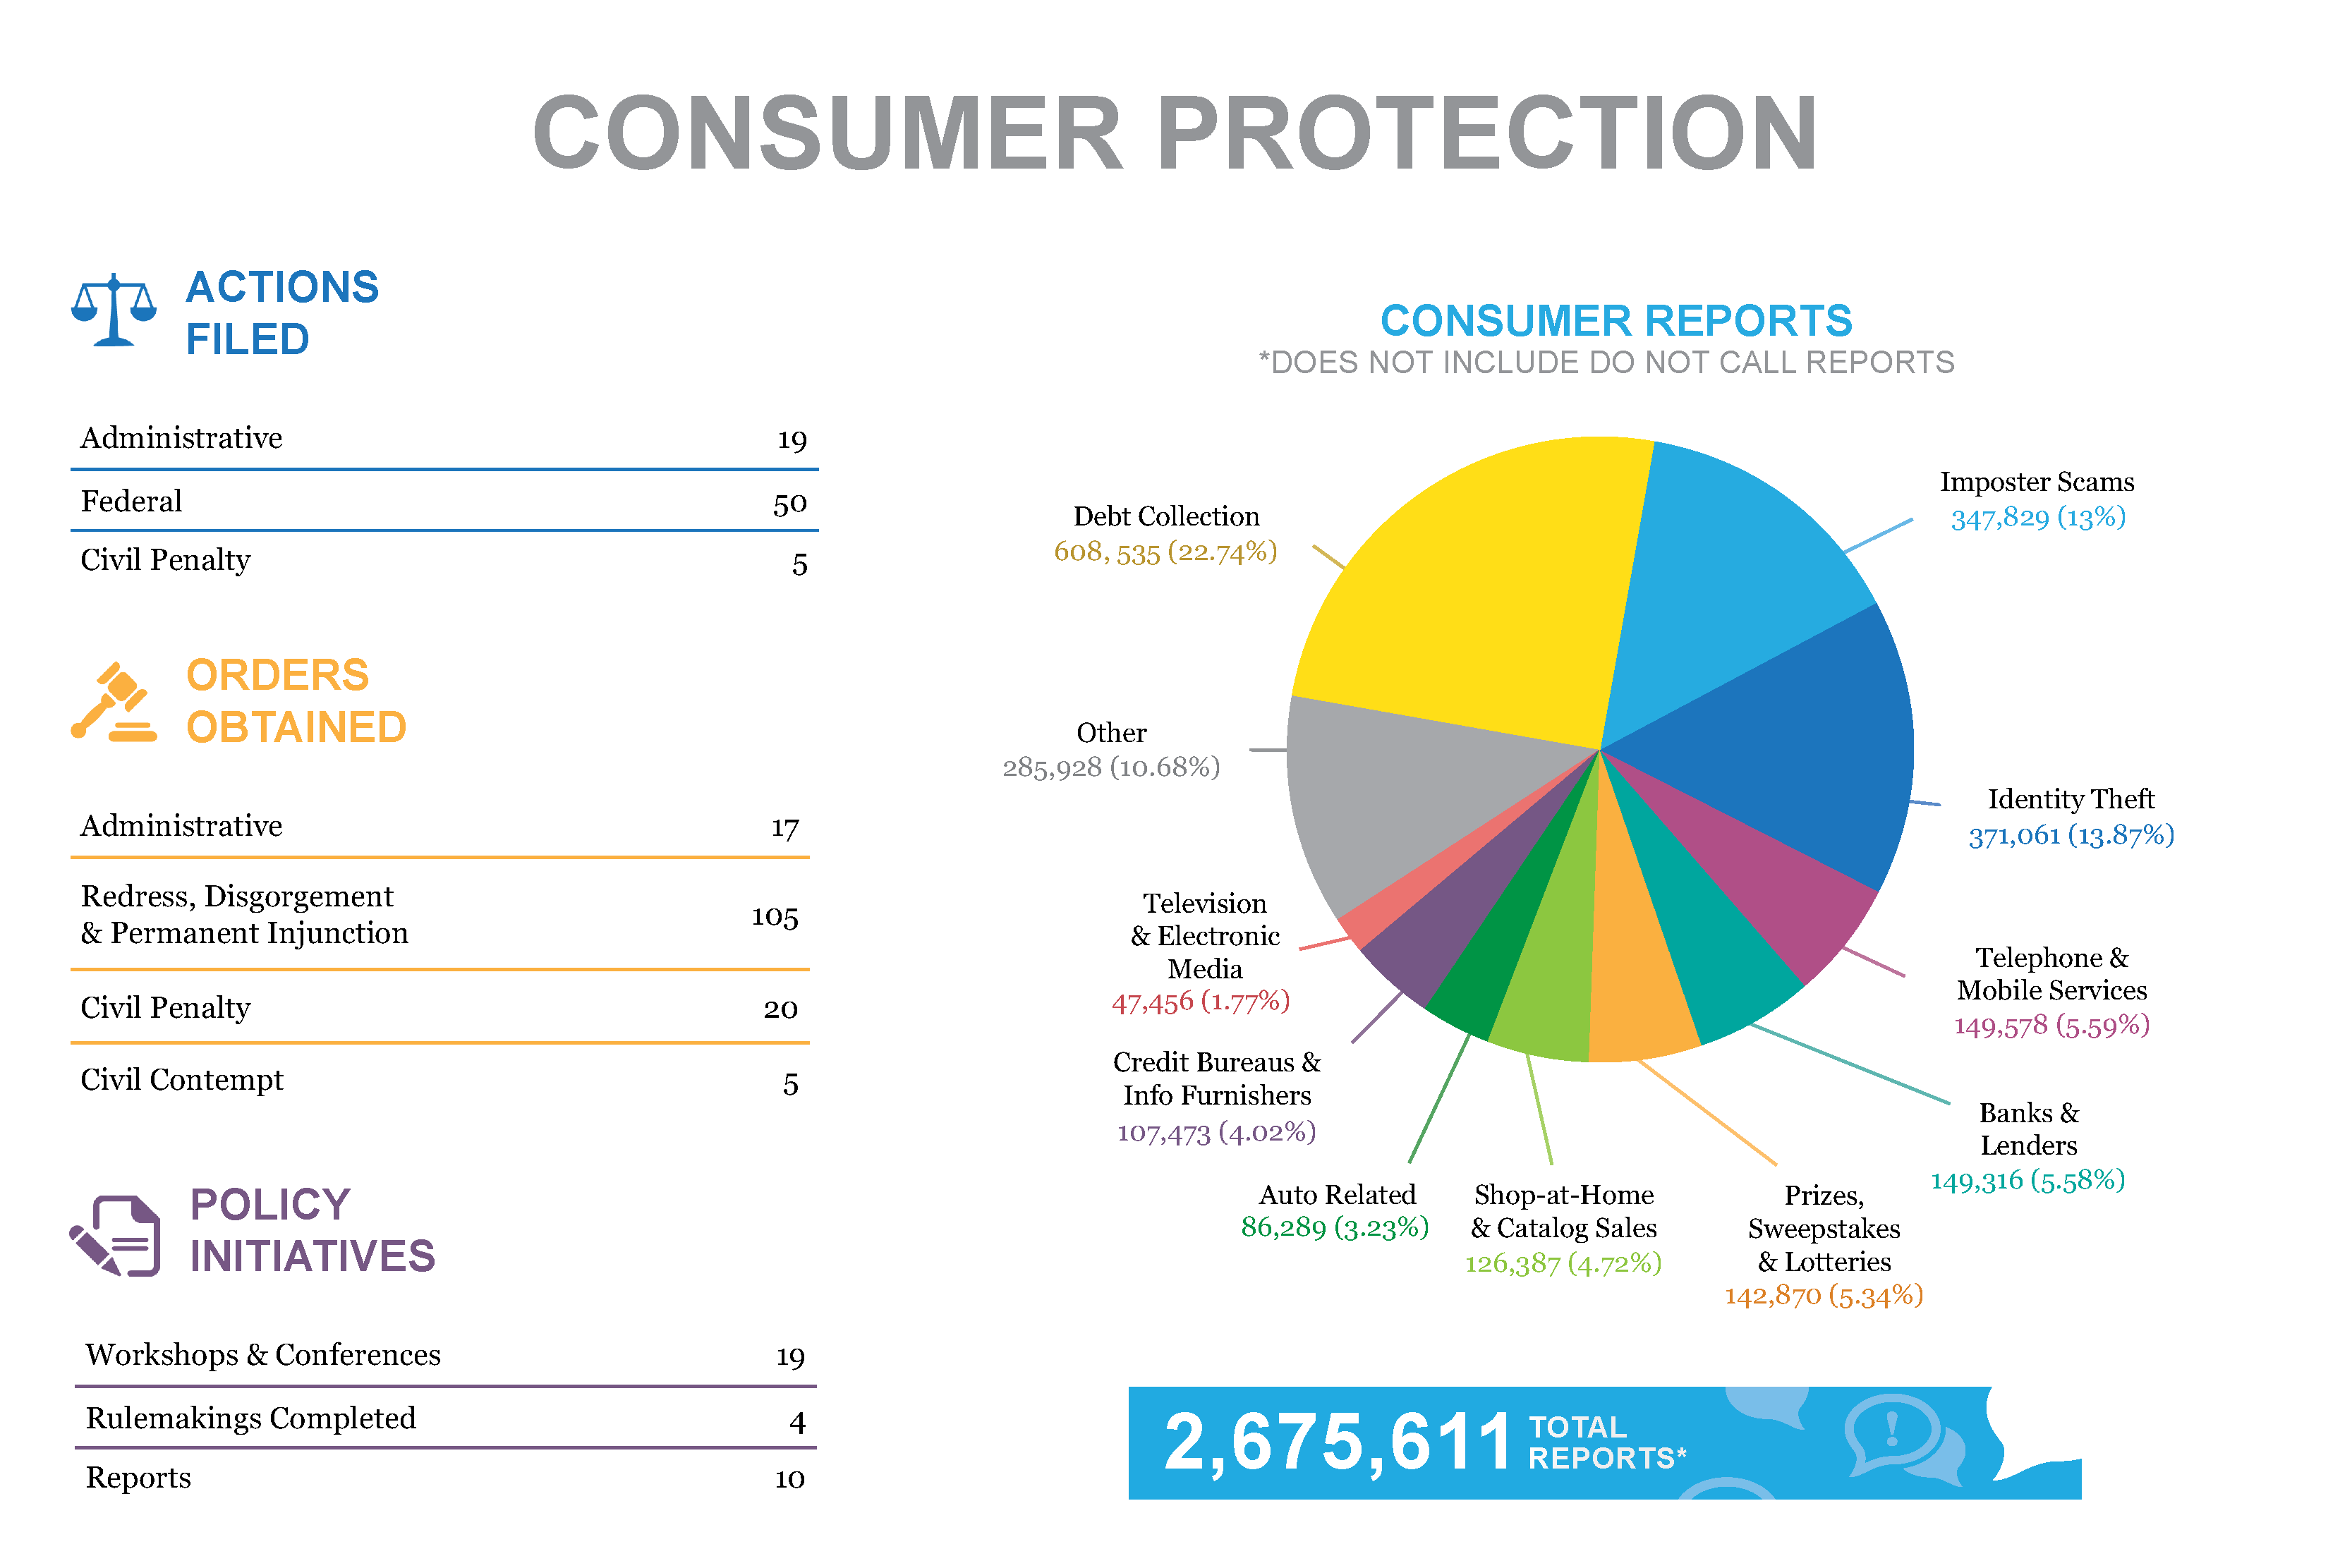 Stats & Data 2017 Consumer Protection infographic